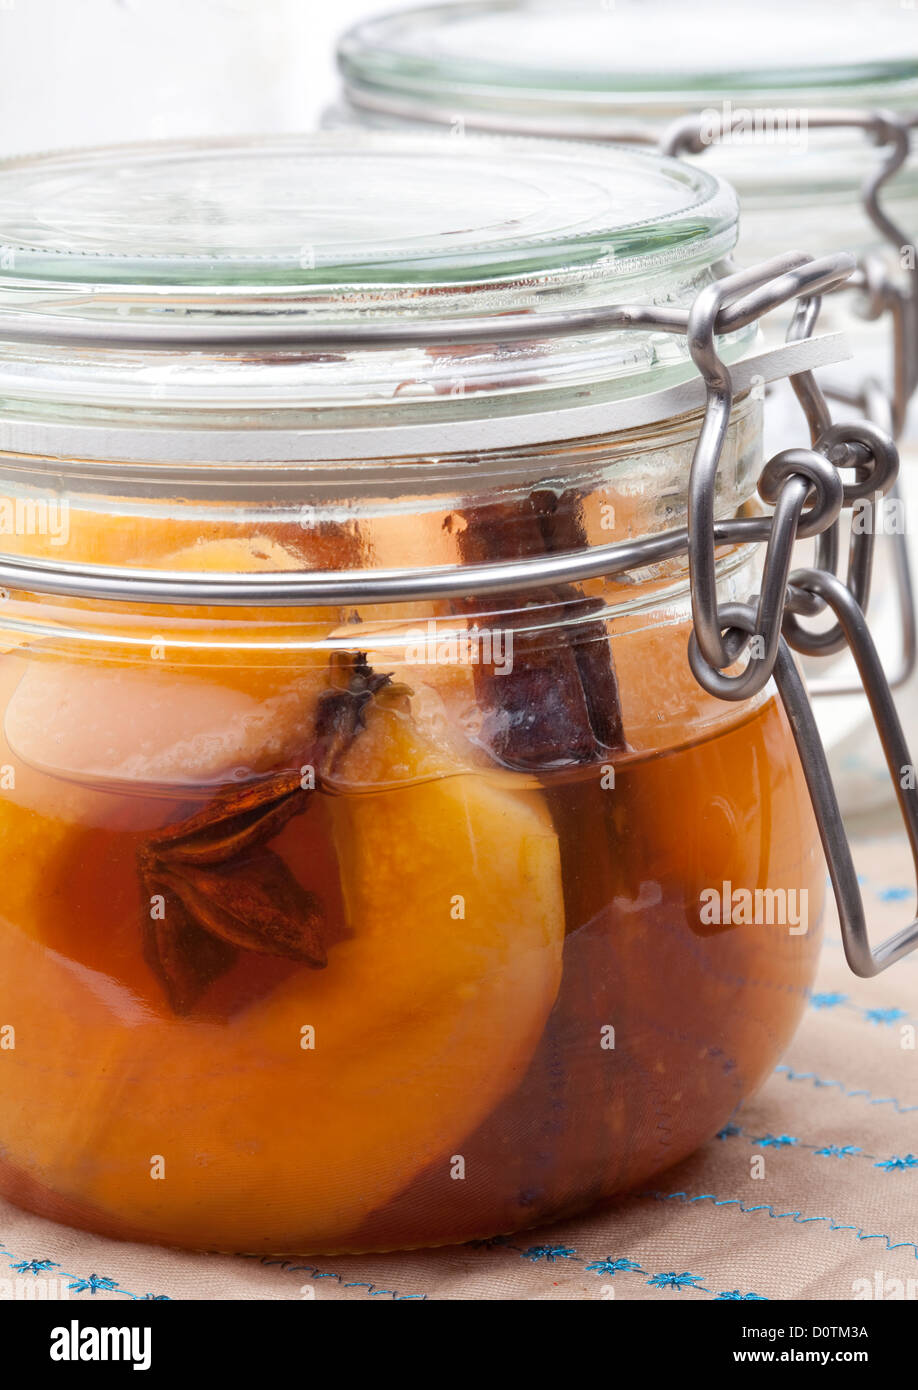 Preserved Quince Stock Photo